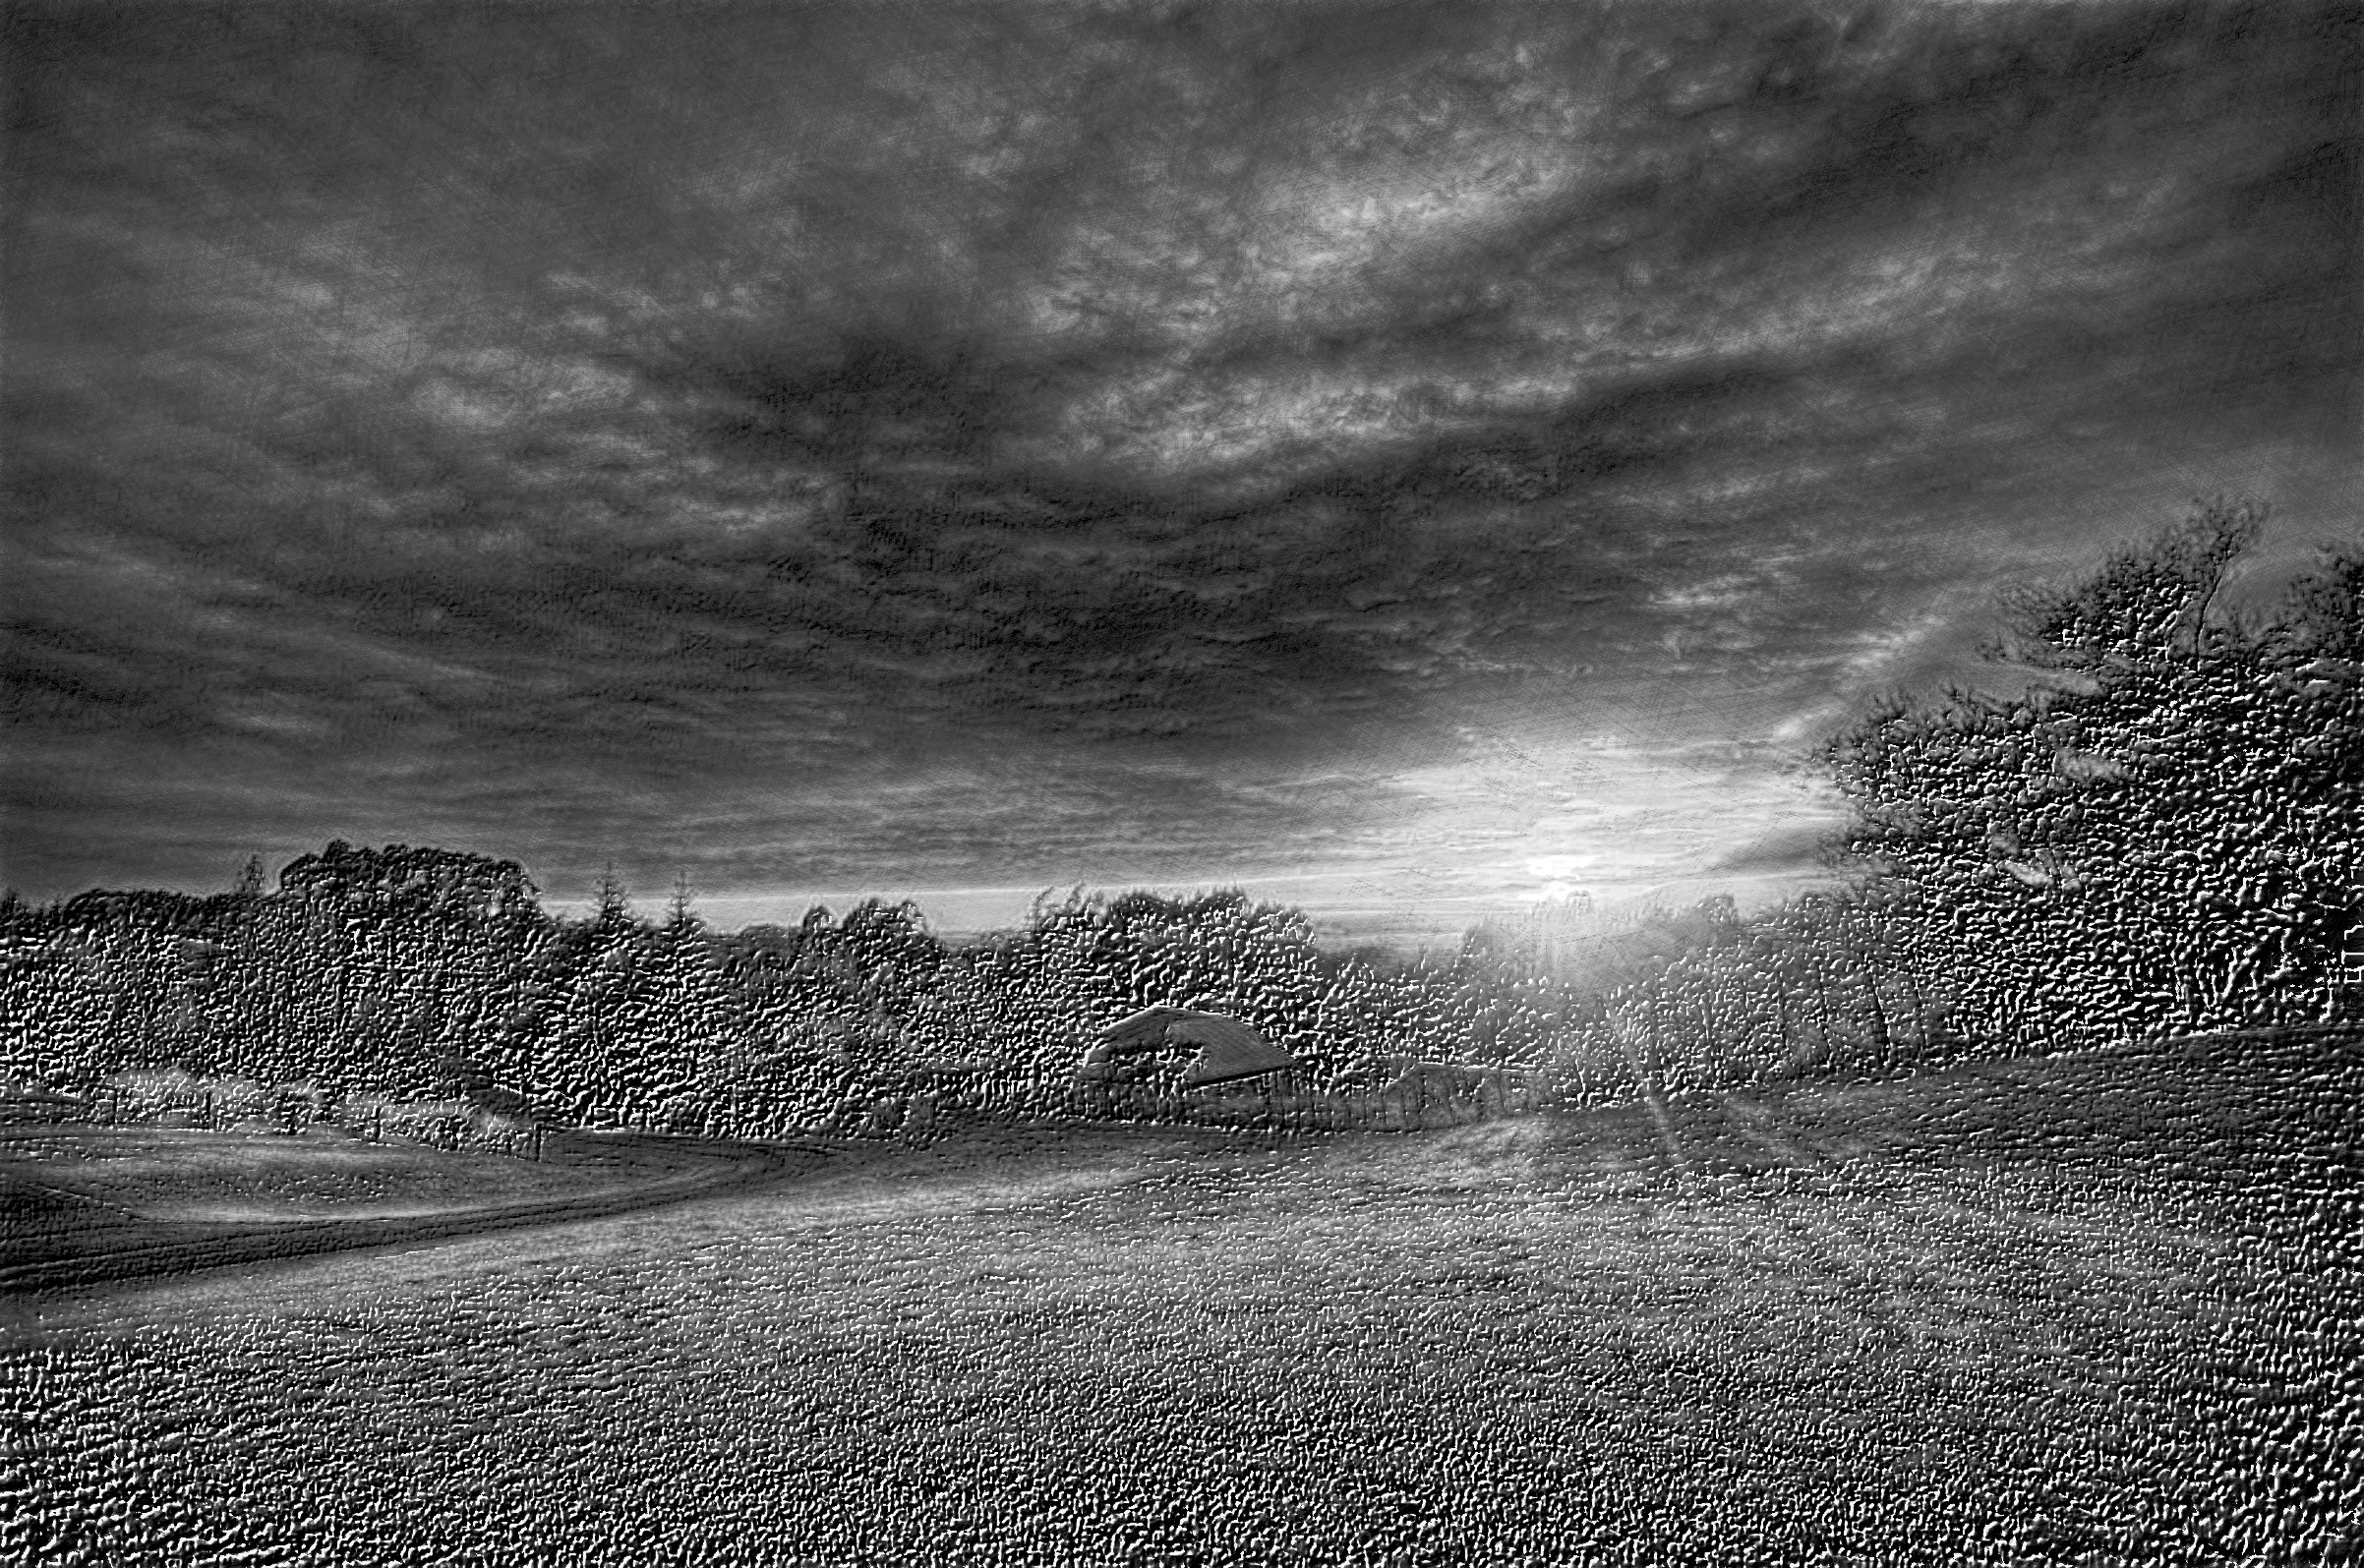 2020-08-25 06-56-34sunset-801736_960_720 with a draw effect, using option B&W and pencil lead=HB (std desat).jpg